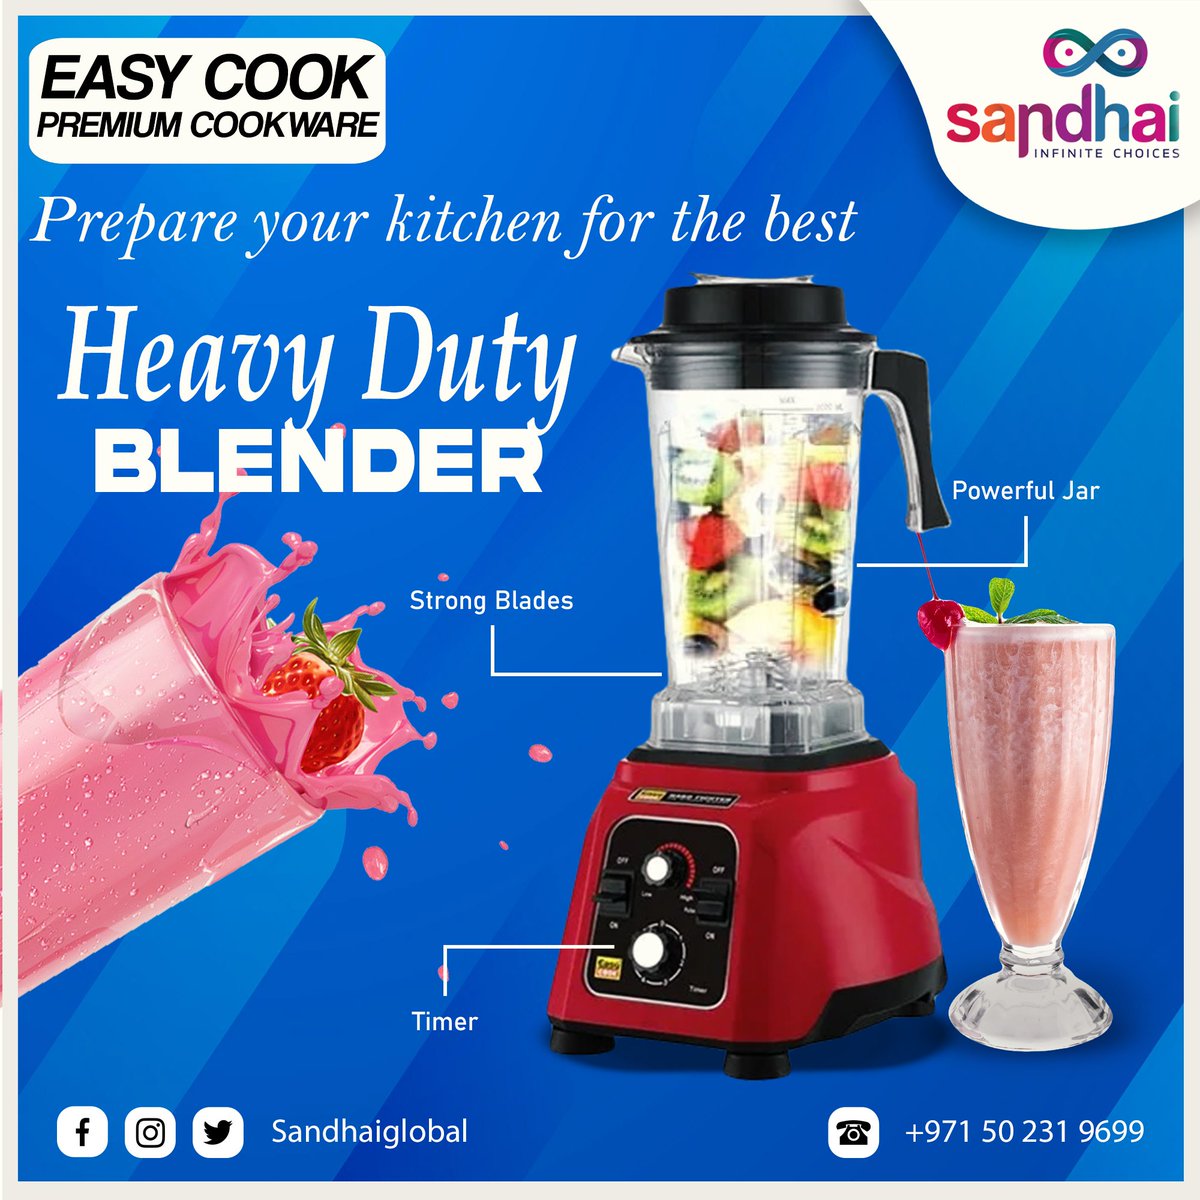 Looking for a blender that can handle anything you throw at it? 
You won't find a better blender than our EasyCook heavy-duty one! 

👉Order Now
🛒-sandhai.ae

#Blender #HeavyDuty #KitchenAppliances #SmoothieMaker #HighPower #IceCrusher #KitchenGadgets #CookingTools